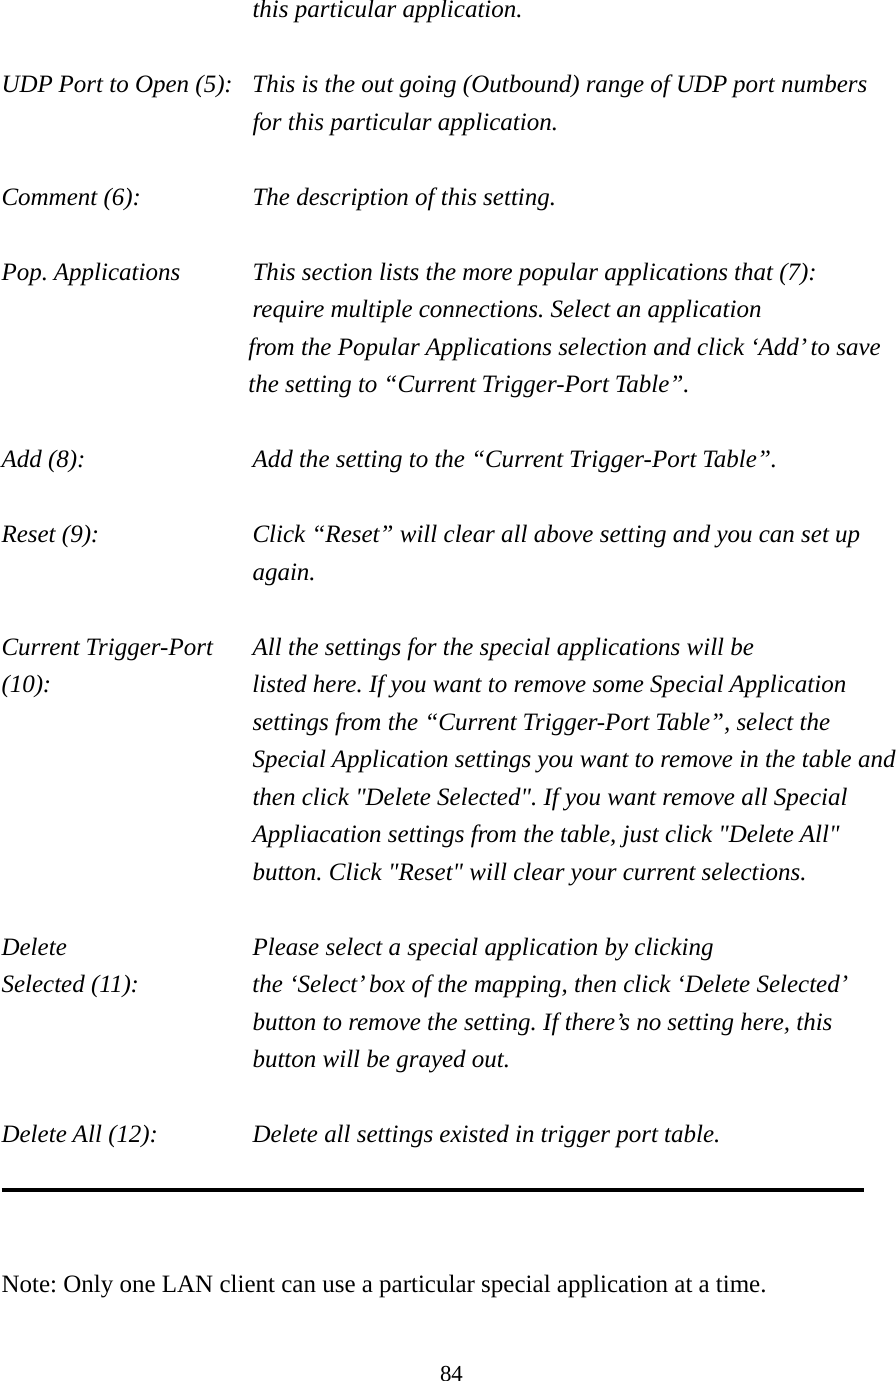 84 this particular application.  UDP Port to Open (5):  This is the out going (Outbound) range of UDP port numbers for this particular application.  Comment (6):      The description of this setting.    Pop. Applications    This section lists the more popular applications that (7):      require multiple connections. Select an application     from the Popular Applications selection and click ‘Add’ to save the setting to “Current Trigger-Port Table”.  Add (8):        Add the setting to the “Current Trigger-Port Table”.  Reset (9):  Click “Reset” will clear all above setting and you can set up again.  Current Trigger-Port    All the settings for the special applications will be   (10):    listed here. If you want to remove some Special Application settings from the “Current Trigger-Port Table”, select the Special Application settings you want to remove in the table and then click &quot;Delete Selected&quot;. If you want remove all Special Appliacation settings from the table, just click &quot;Delete All&quot; button. Click &quot;Reset&quot; will clear your current selections.  Delete          Please select a special application by clicking Selected (11):    the ‘Select’ box of the mapping, then click ‘Delete Selected’ button to remove the setting. If there’s no setting here, this button will be grayed out.  Delete All (12):      Delete all settings existed in trigger port table.    Note: Only one LAN client can use a particular special application at a time.  